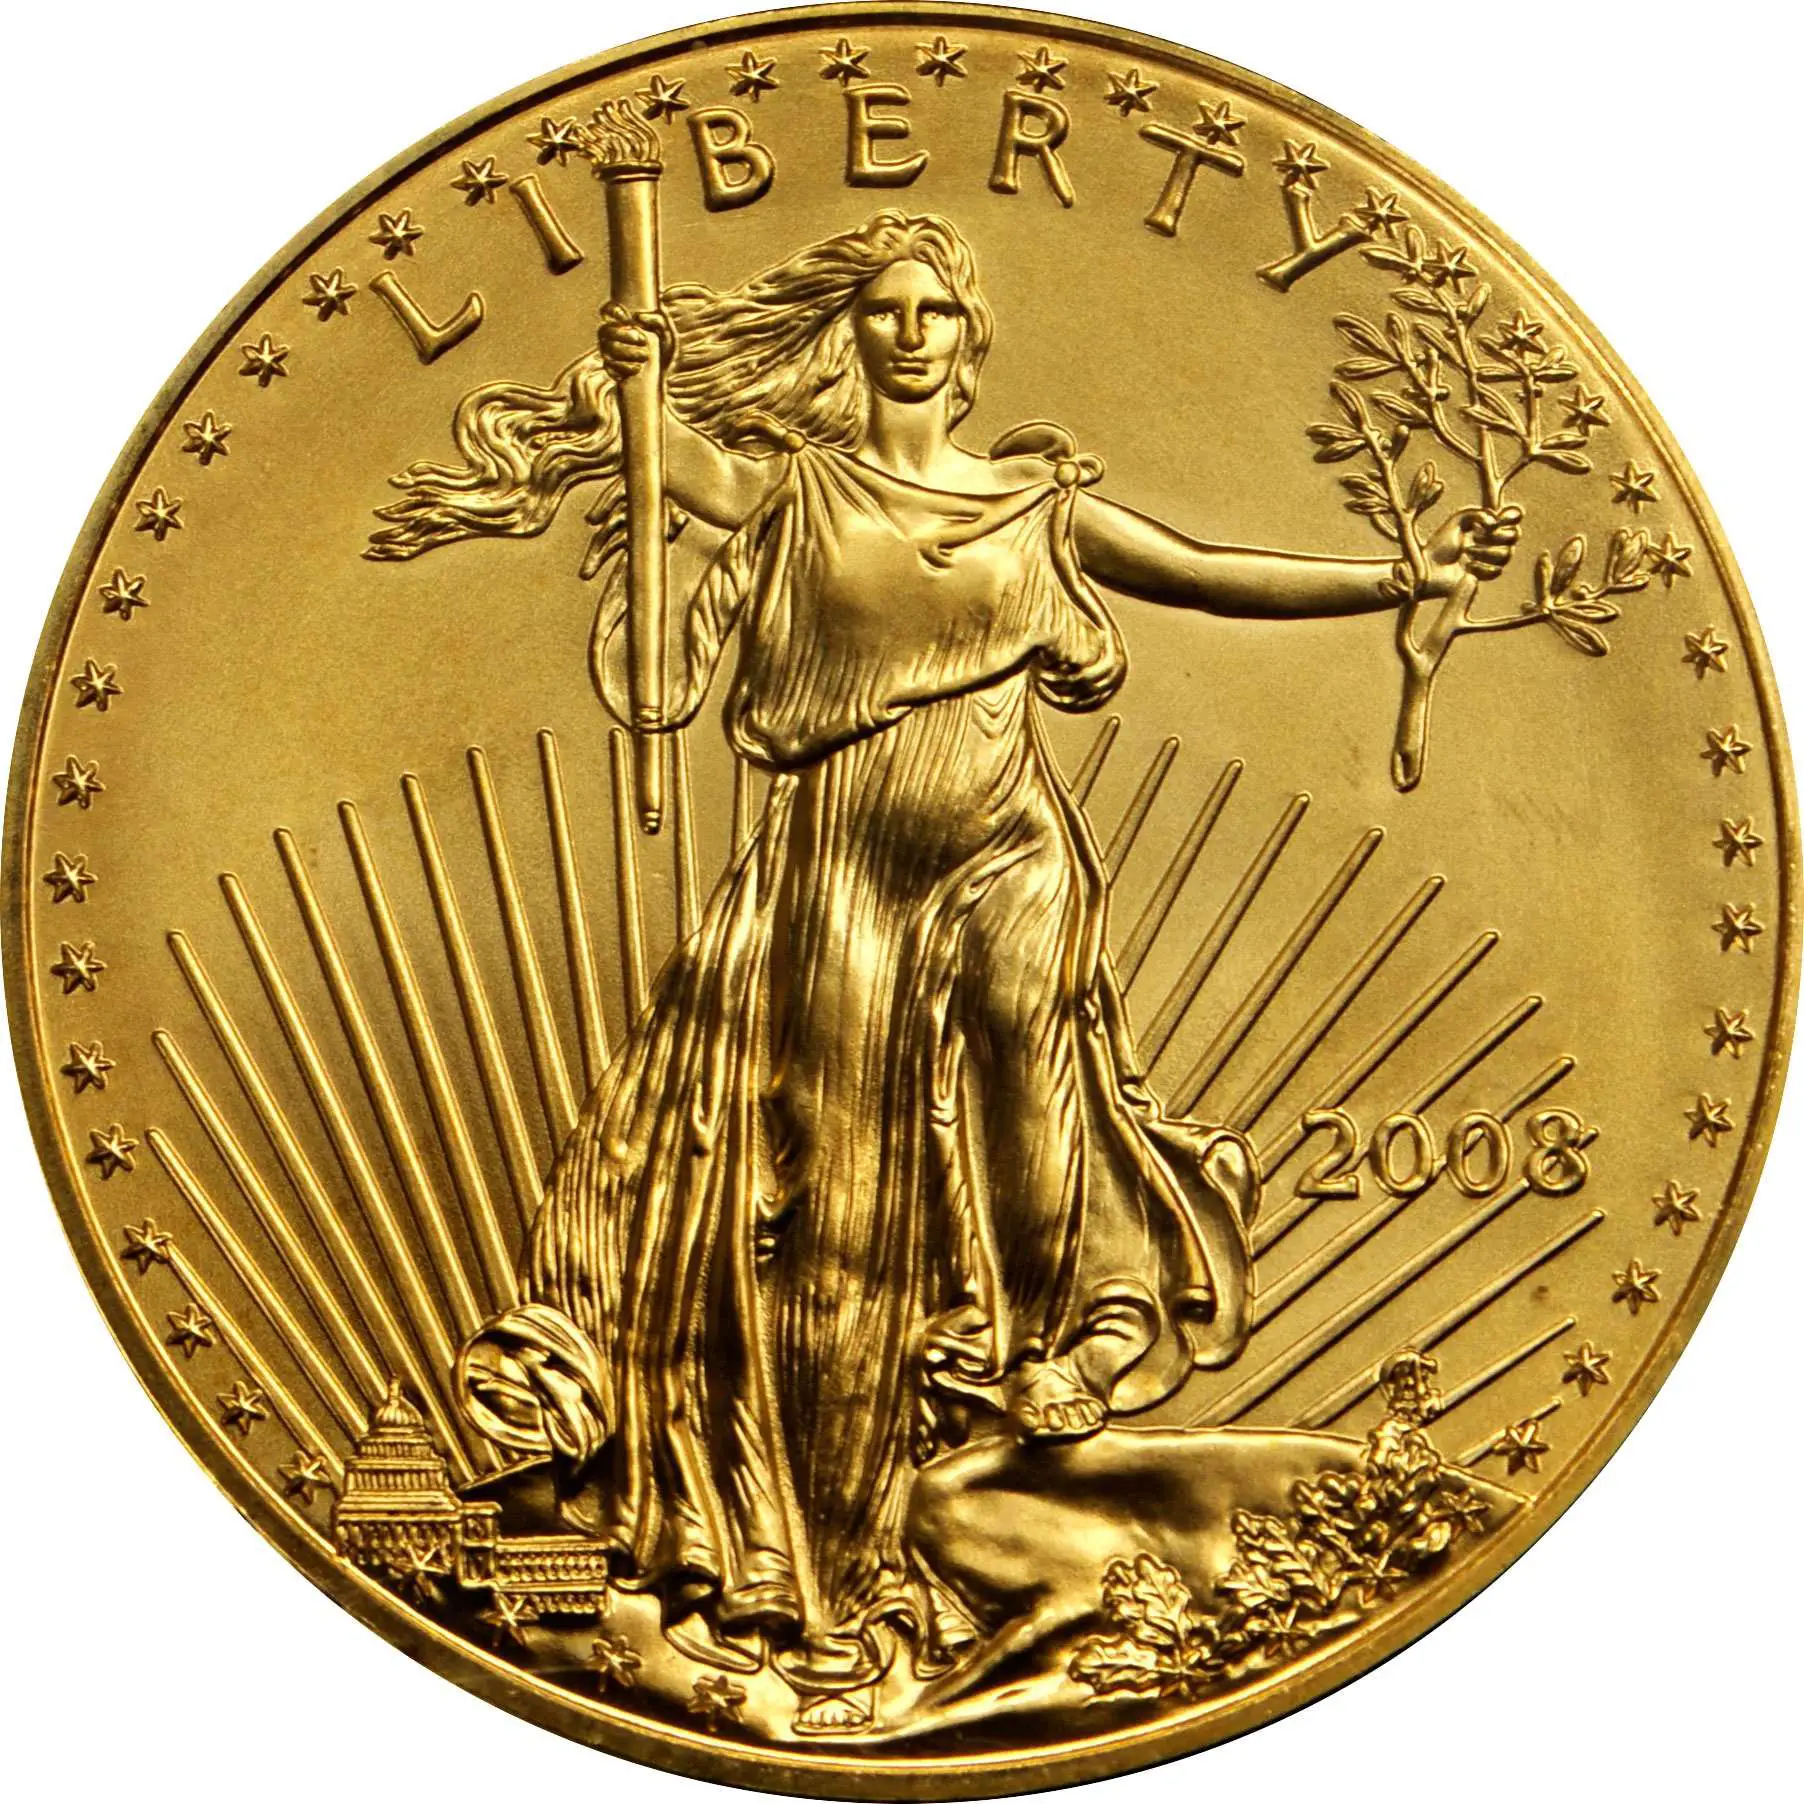 Value of 2008 $10 Gold Coin